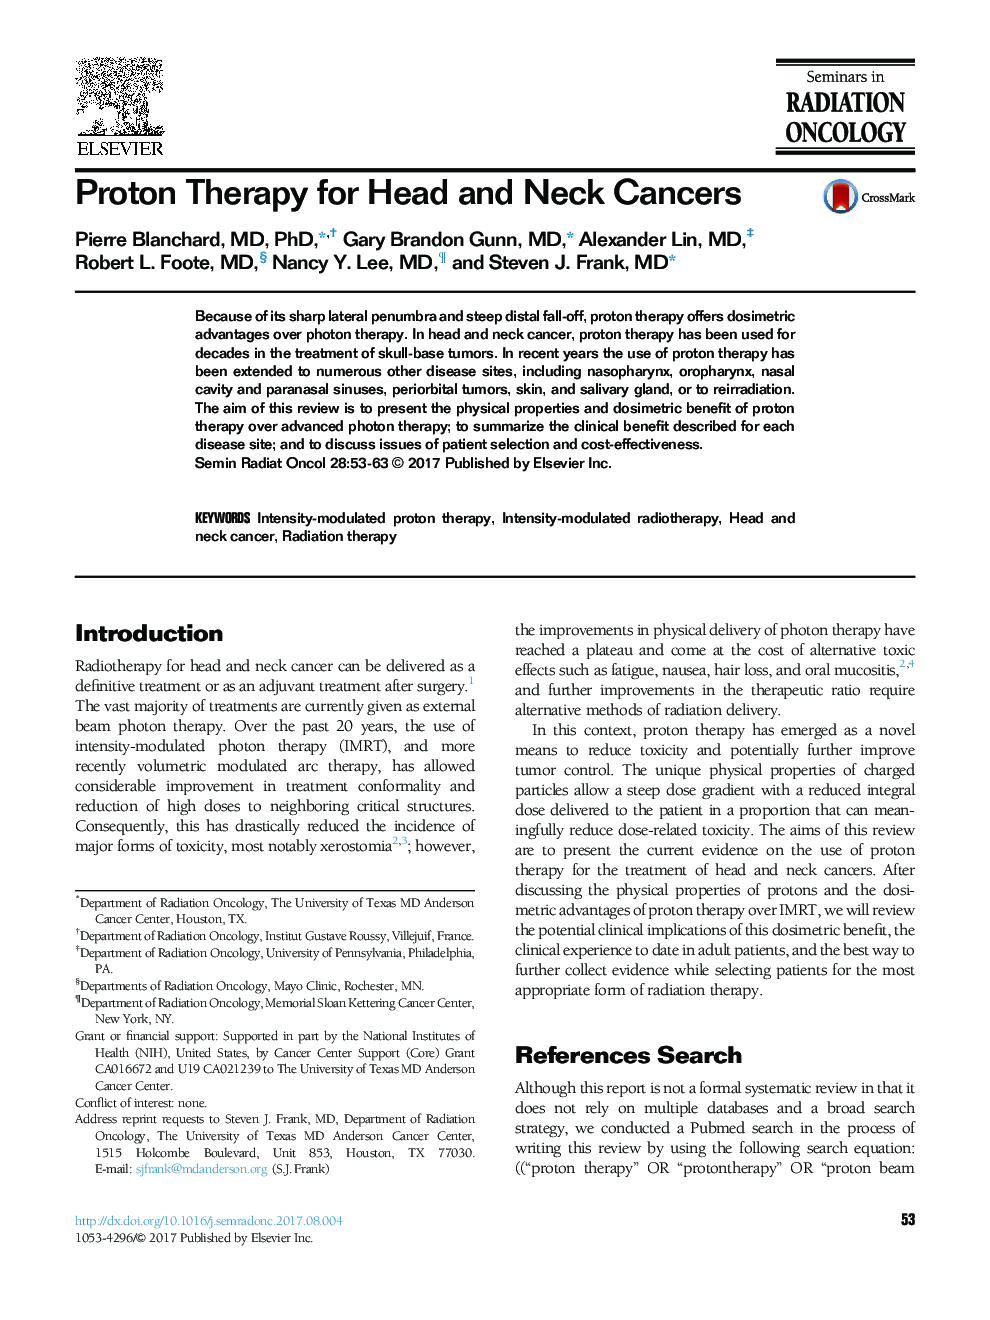 Proton Therapy for Head and Neck Cancers